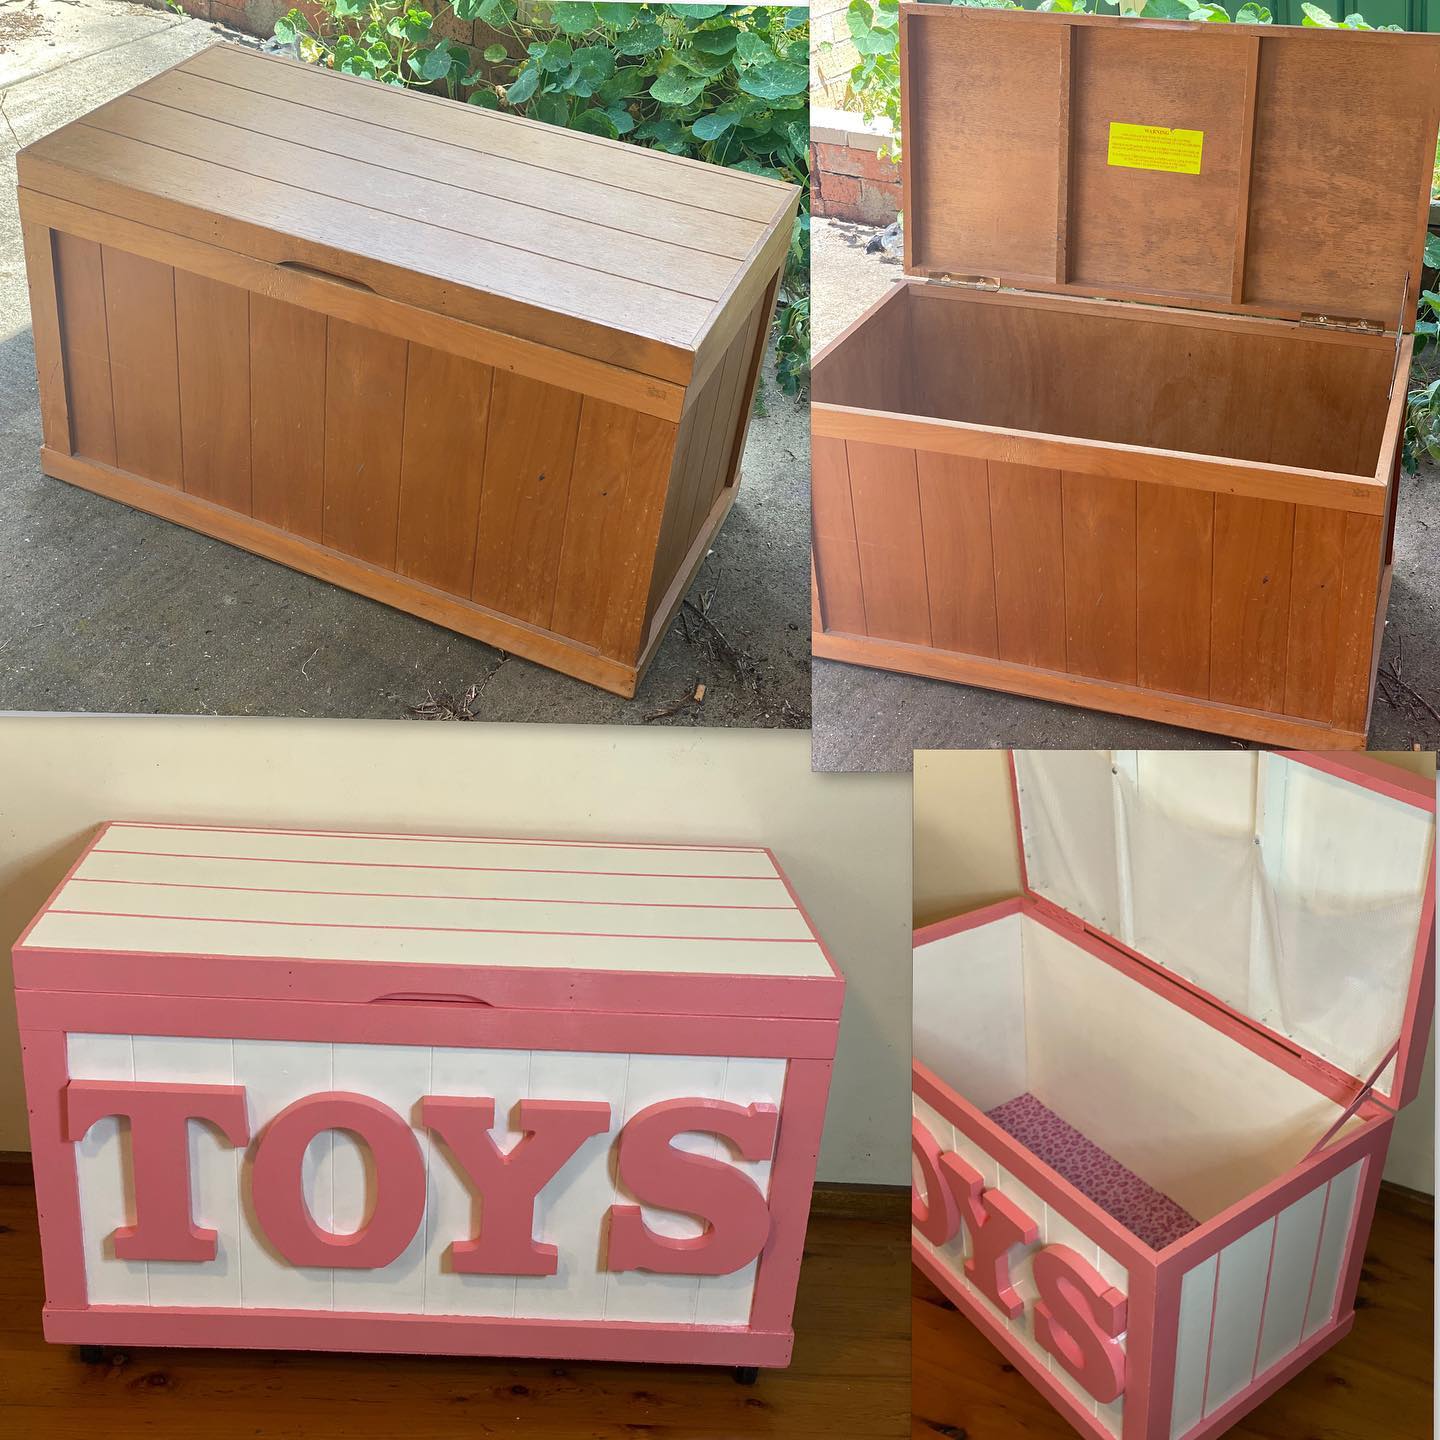 Before & after. A plain wooden box transformed into a brand new looking toy box on wheels. Including mesh lining inside the lid for soft toys. 
.
.
.
.
.
.
.
.
.
#diy
#whiteknightpaints
#paintmeprettybyvicky
#diy
#diycrafts 
#diyprojects 
#upcycling 
#upcycledfurniture 
#reloved
#trashandtreasure
#paintingpro
ryobiau 
#ryobimade